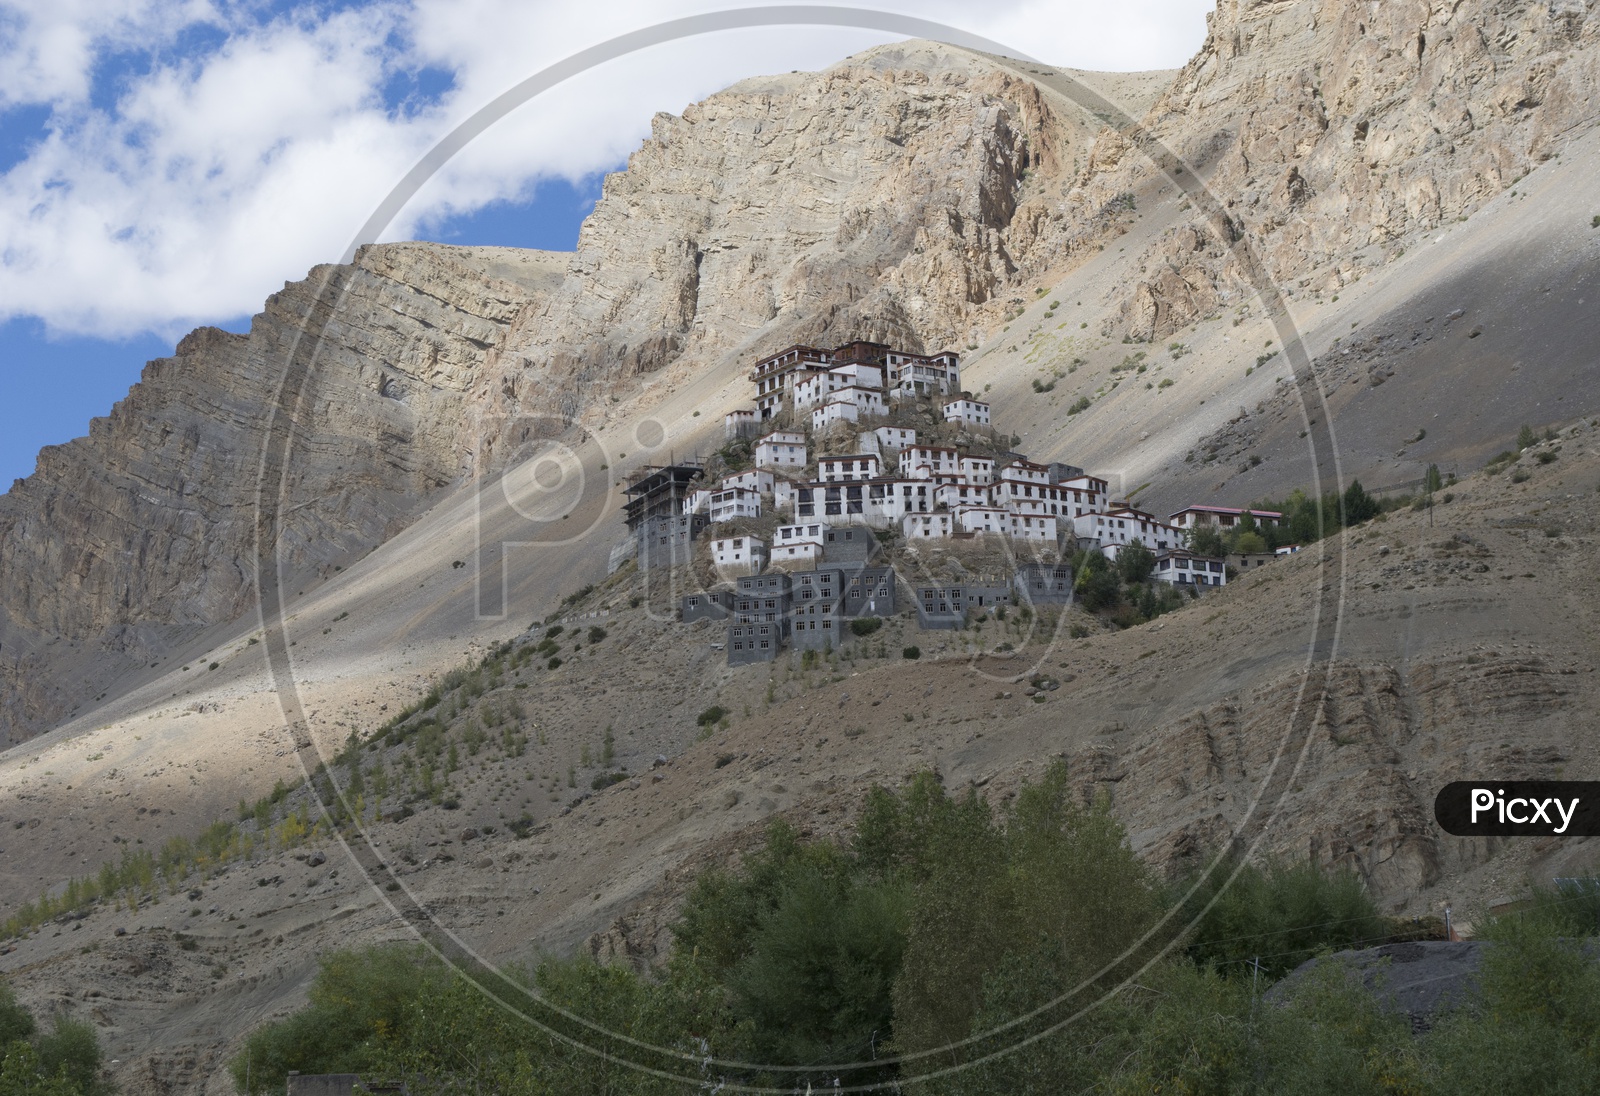 Kye Monastry atop the hill in Spiti valley